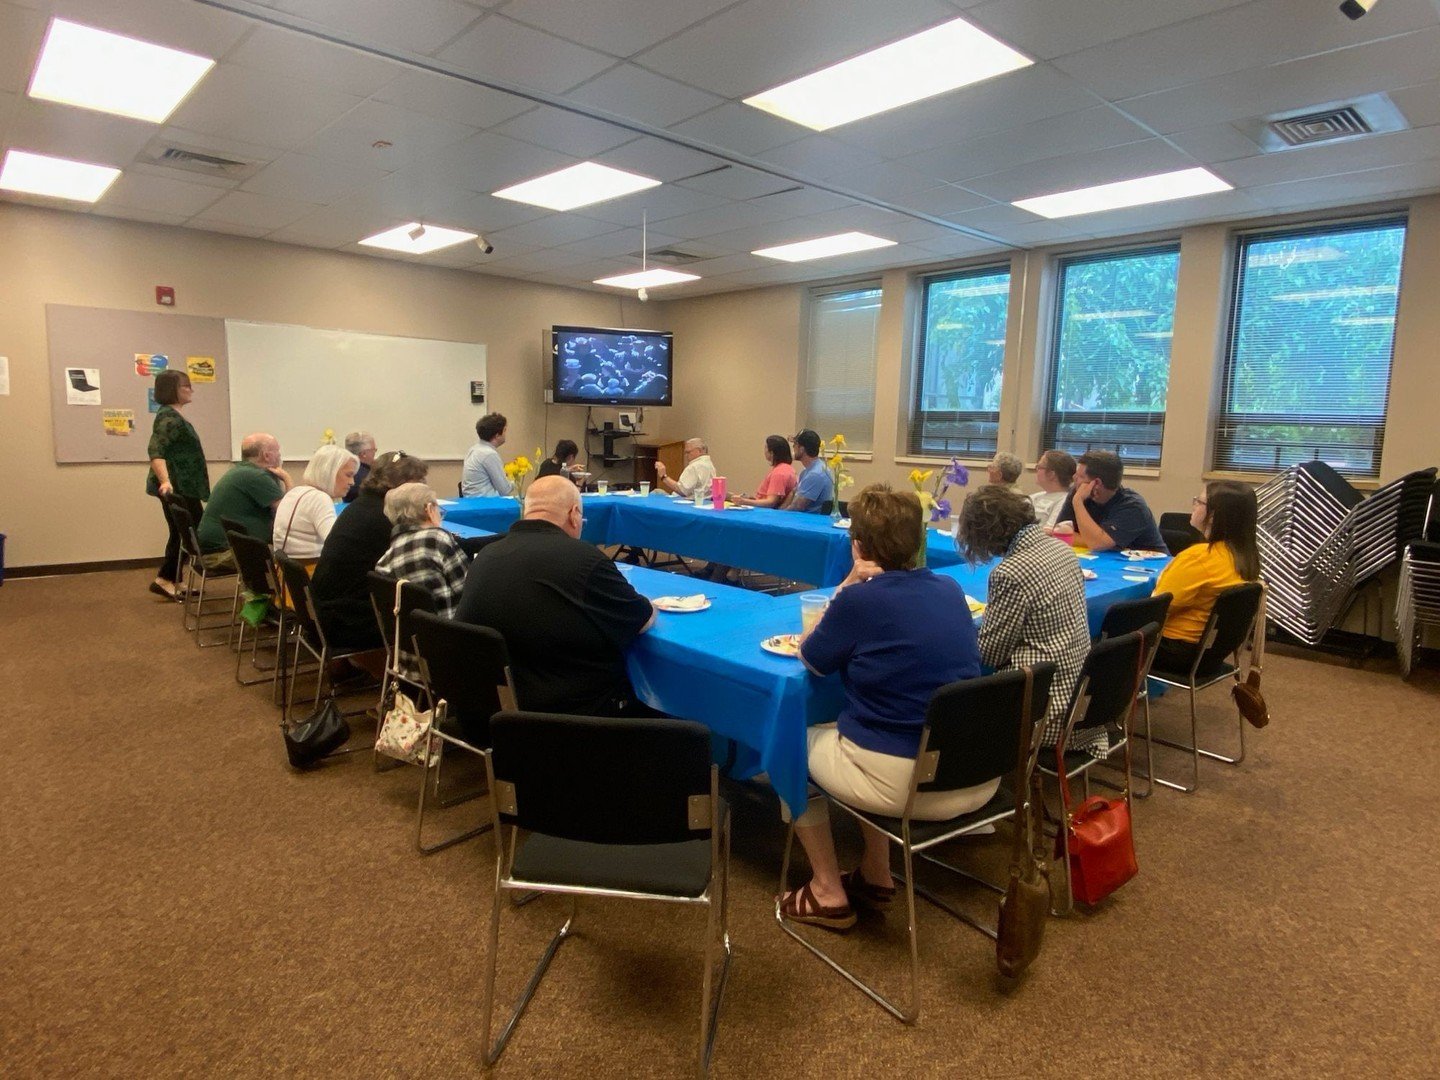 Thank you for joining us at out Dinner for Newcomers at East Heights!  It was an evening of warmth and connection as our guests, pastors and staff shared in fellowship and faith. Welcome to our community!  Looking forward to more wonderful moments to